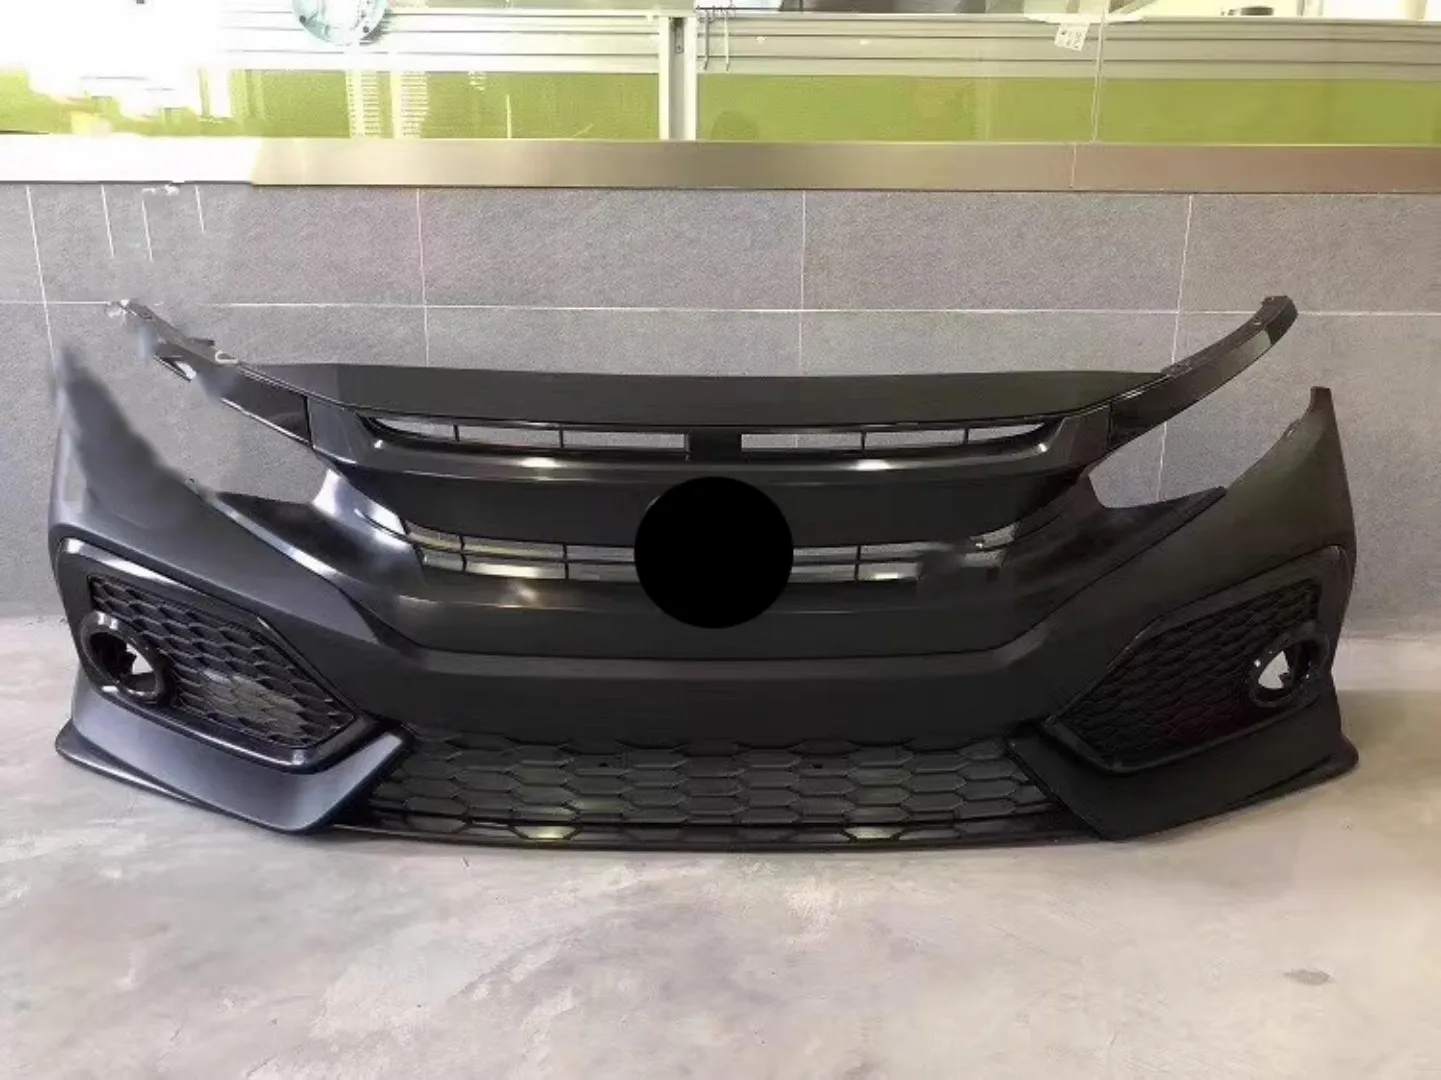 

Front Rear Bumper grill mask radiator grille for Honda civic 10th SI surround carbon fiber front lip body kit Car Accessories